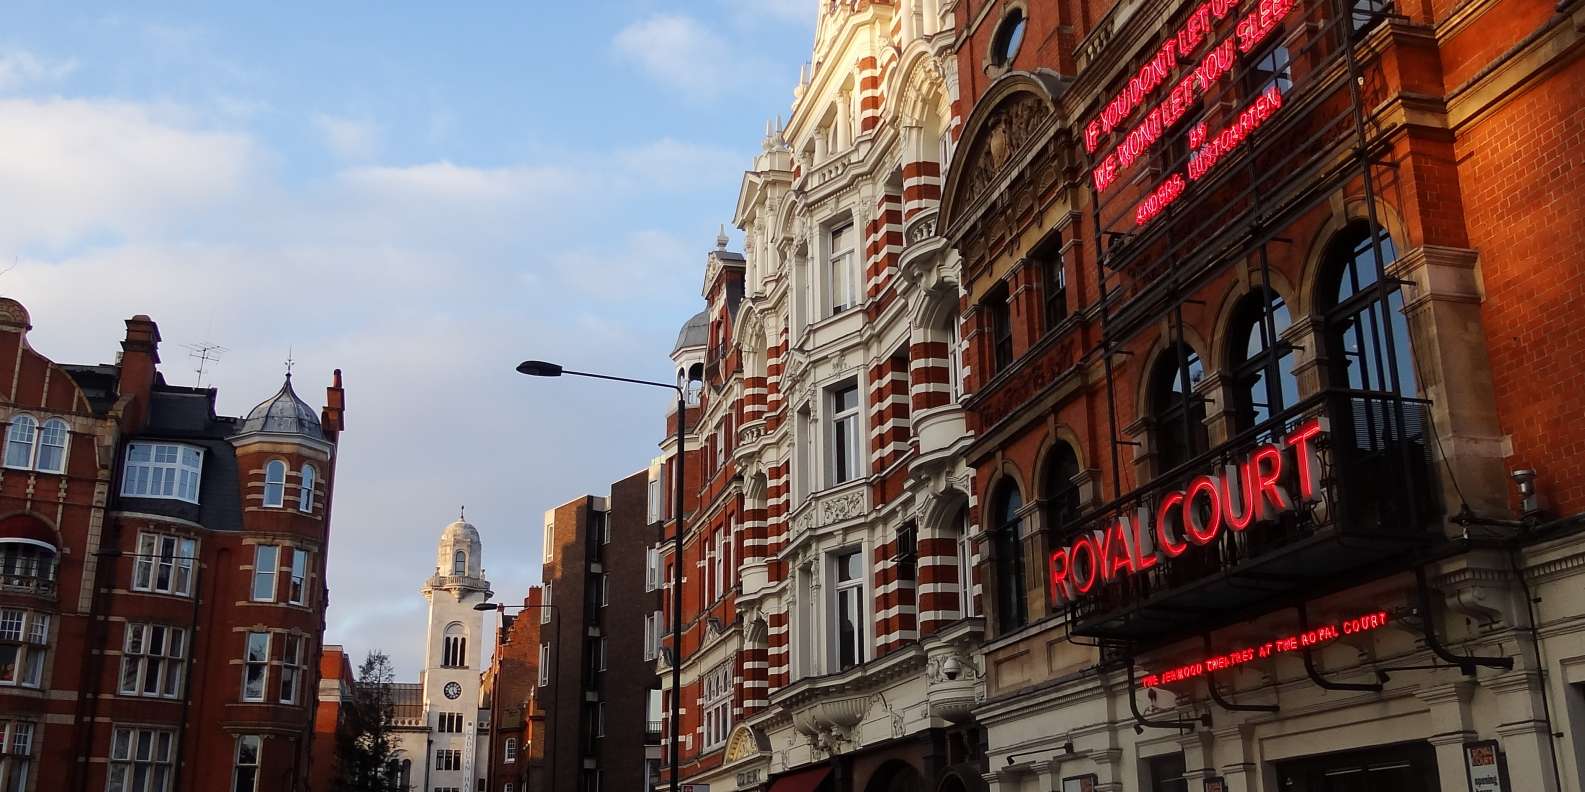 Royal Court Theatre, London - Book Tickets & Tours | GetYourGuide